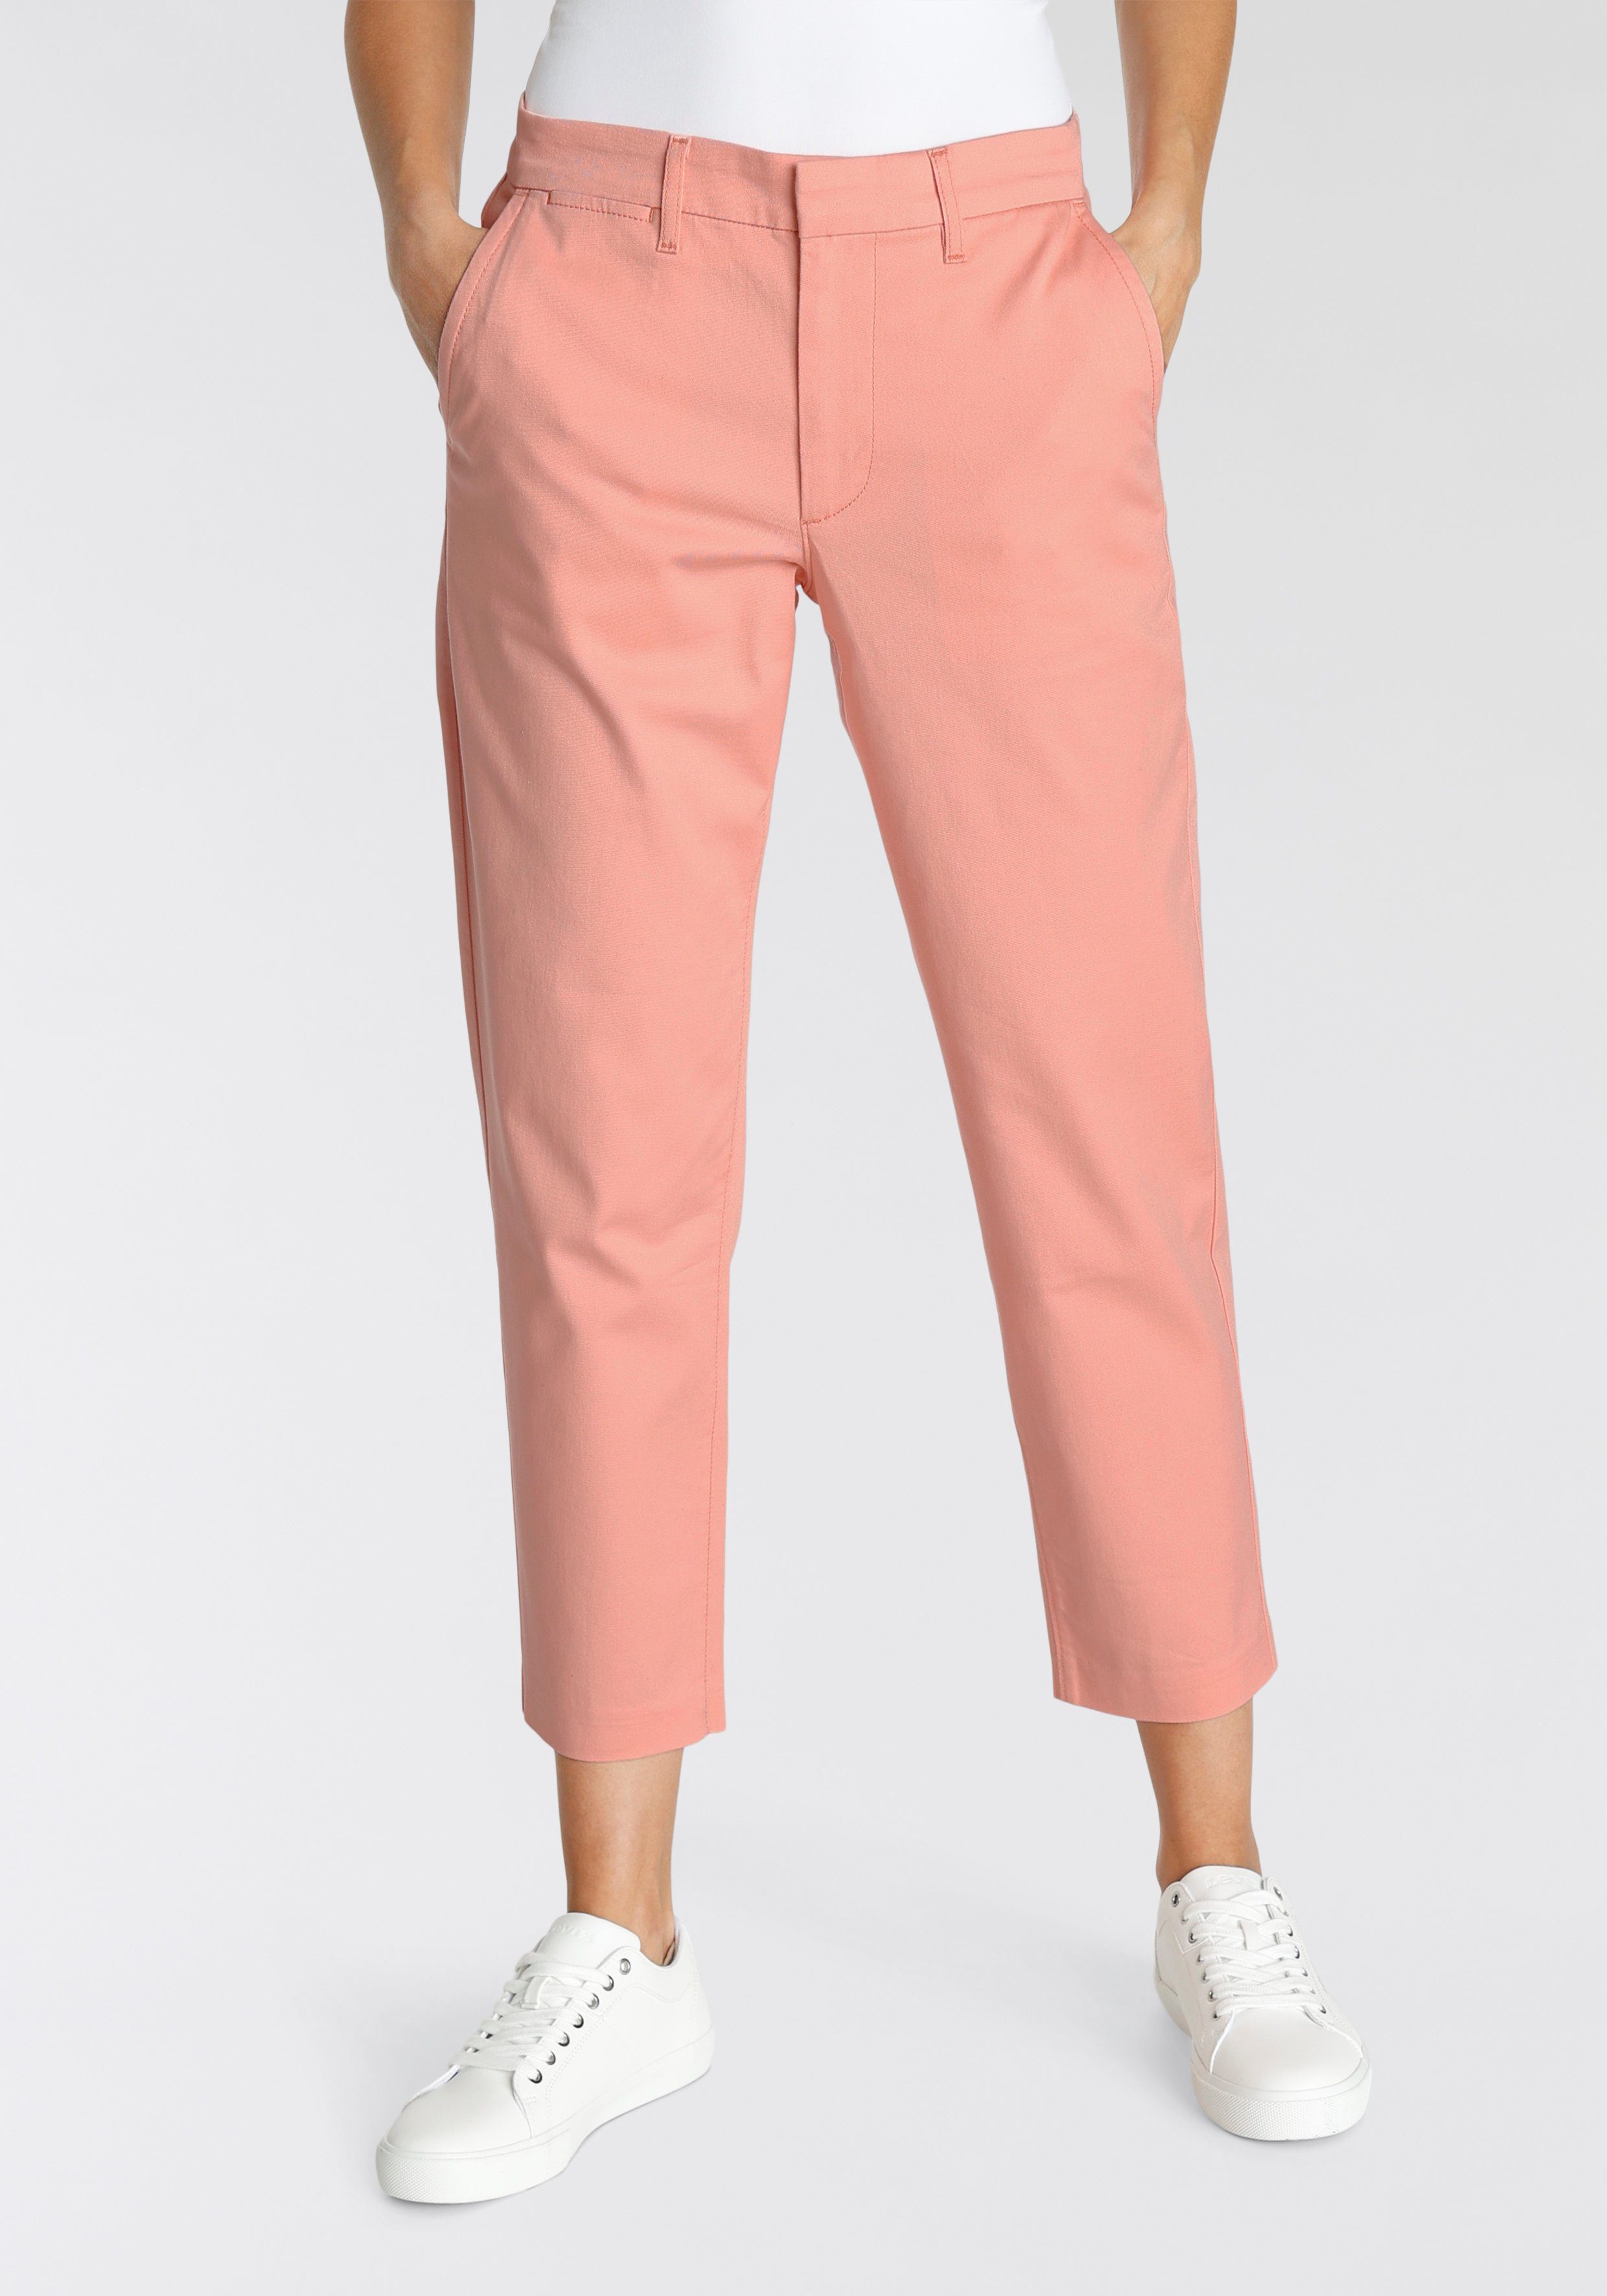 Levi's® Chinohose ESSENTIAL coral pink